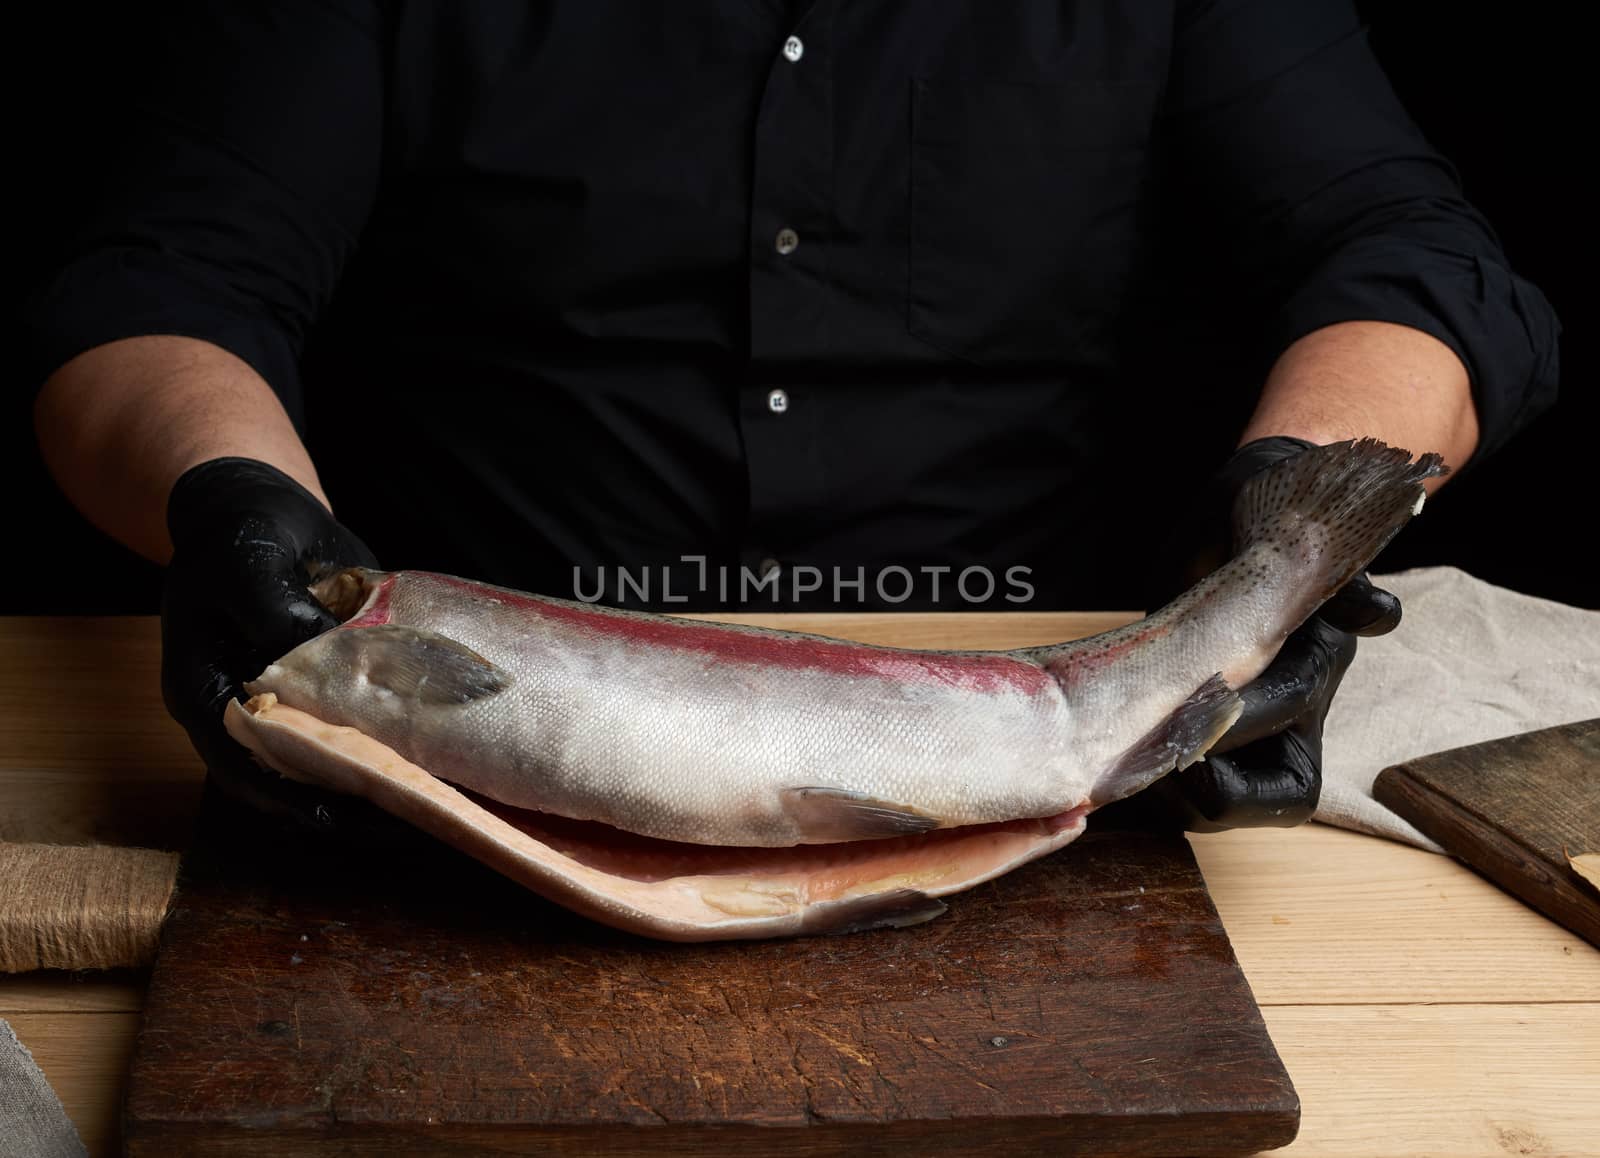 chef in a black shirt and black latex gloves holds a raw carcass of headless salmon fish over a brown wooden cutting board